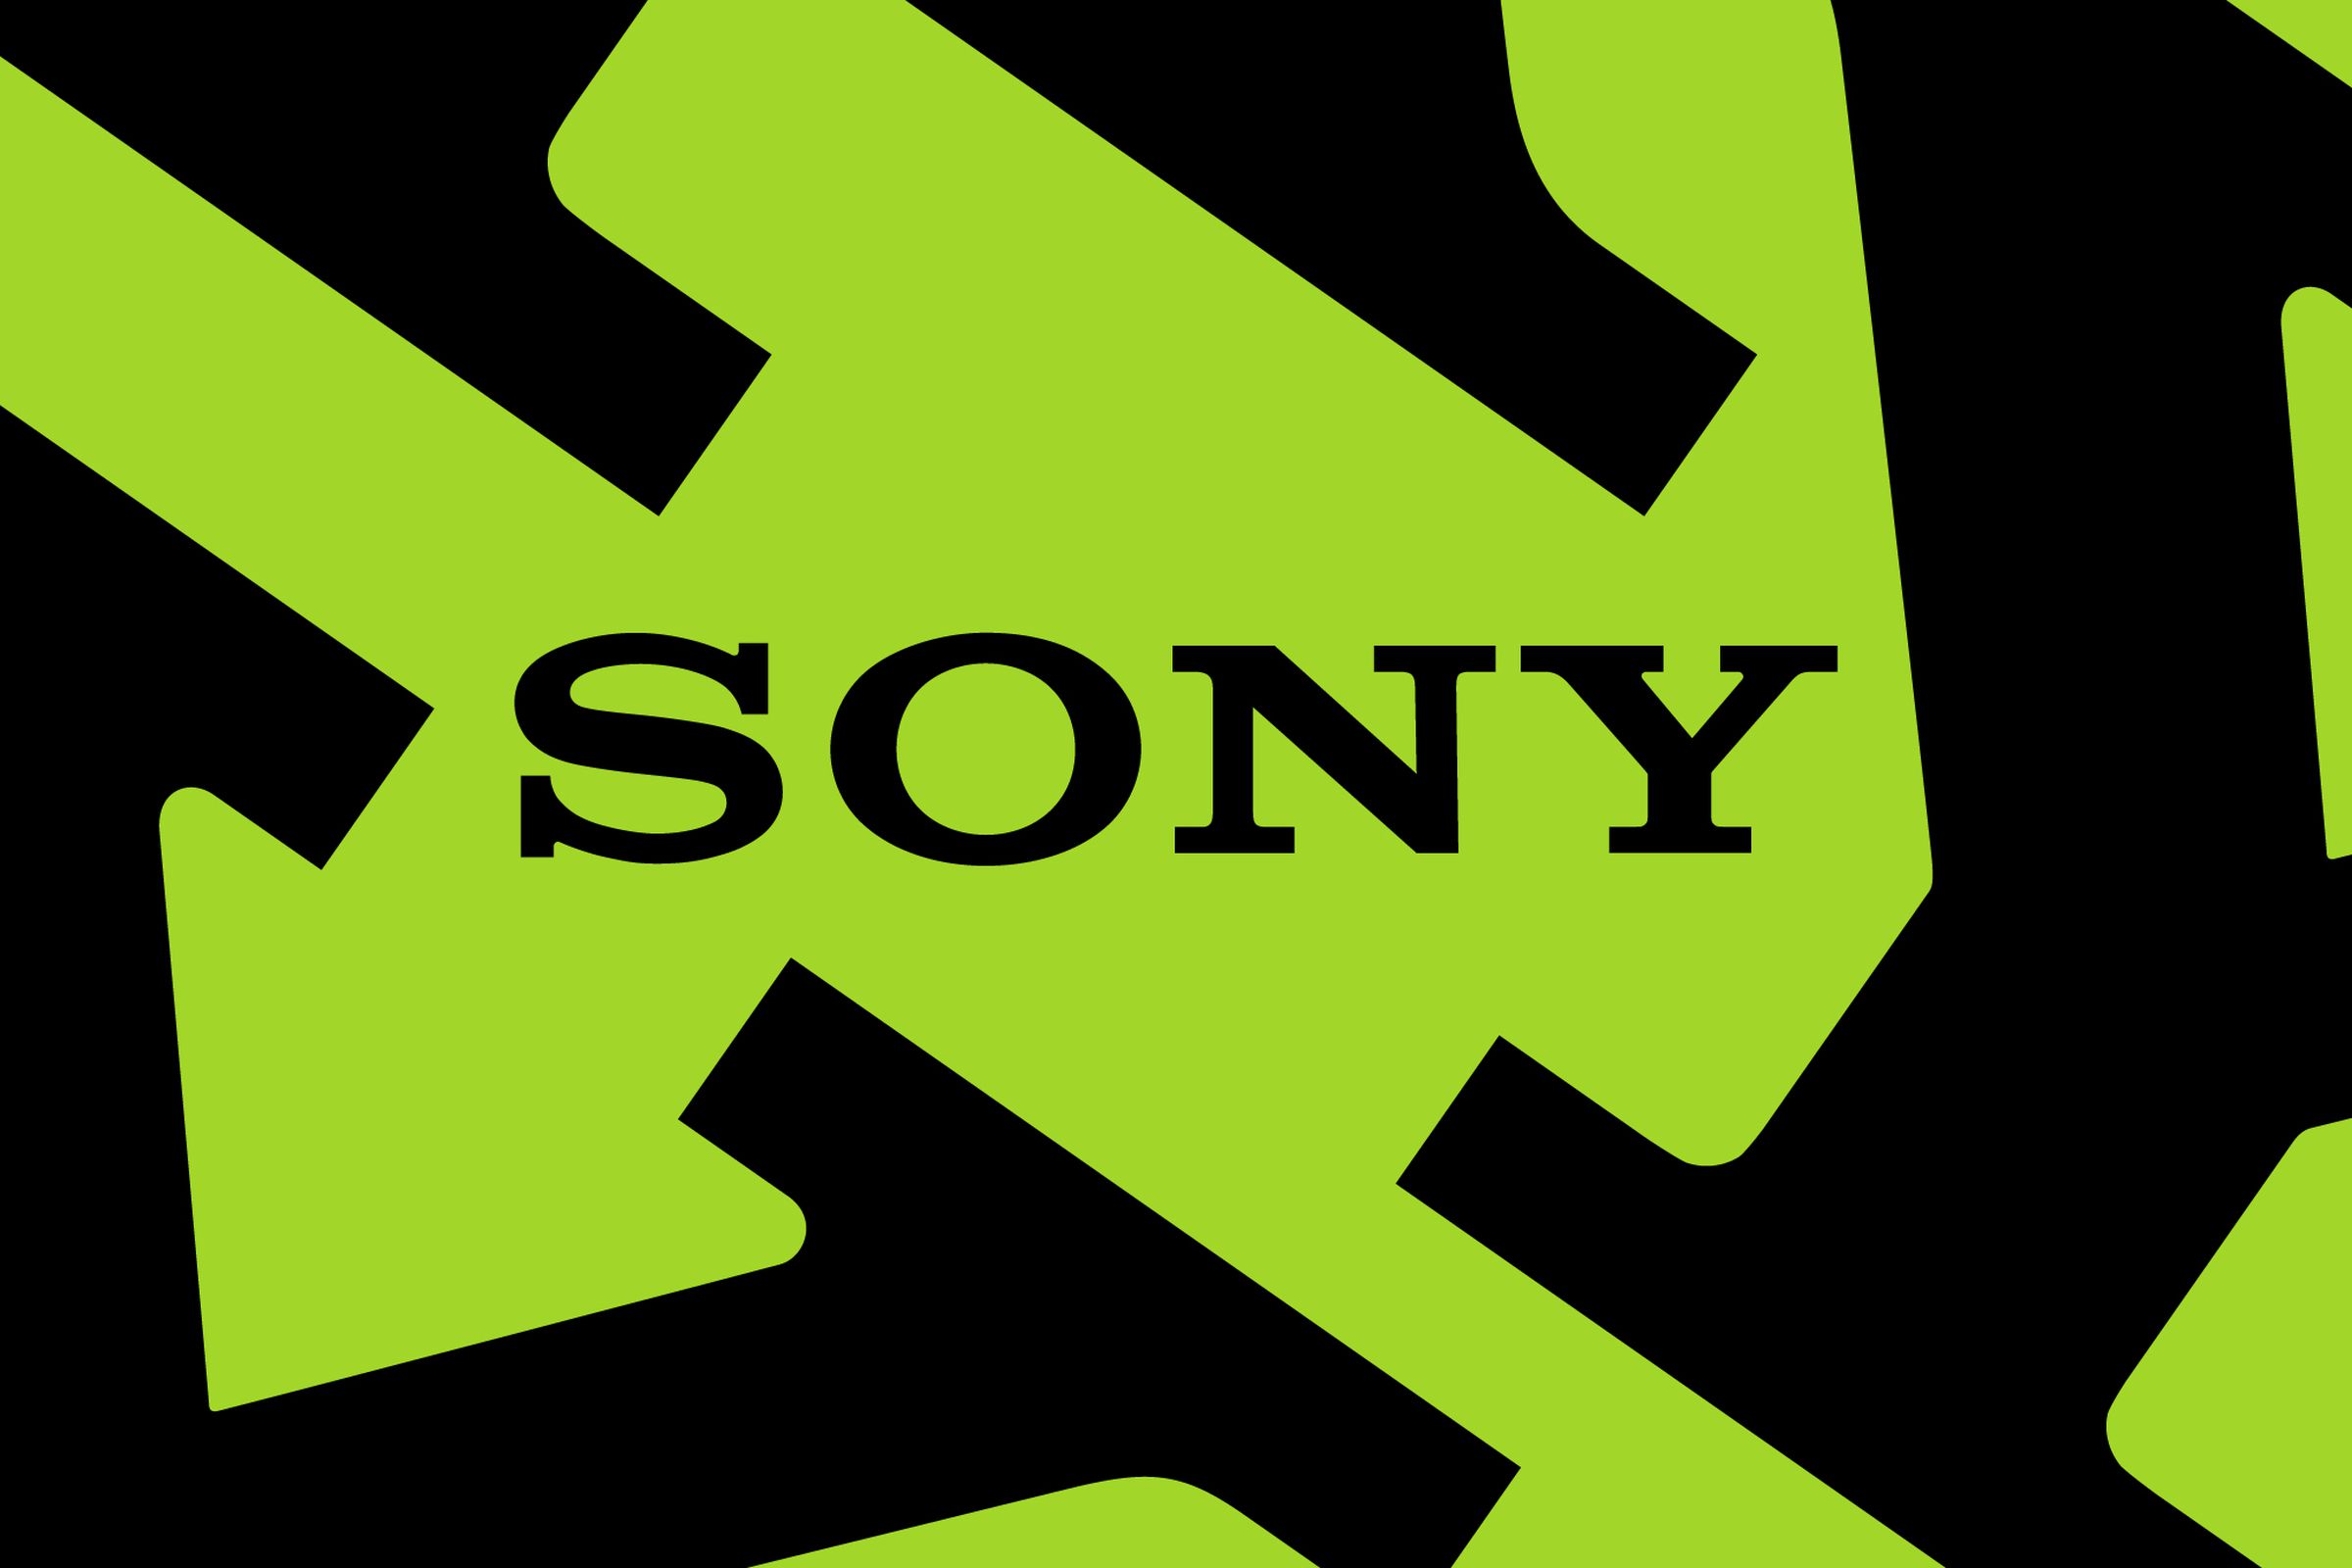 An image showing Sony’s logo on a green and black background